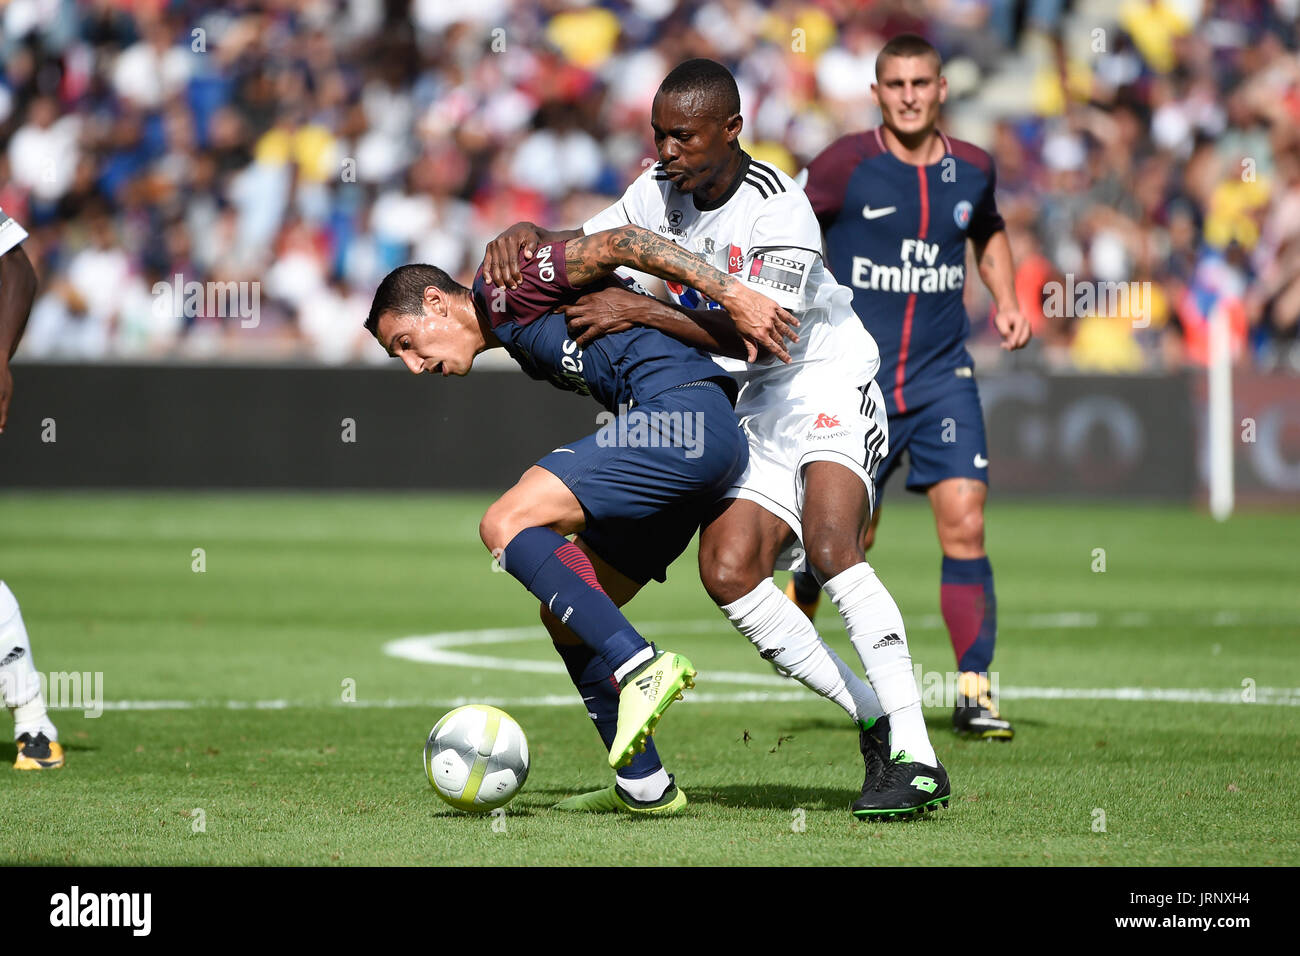 Paris. 5th Aug, 2017. Angel Di Maria (L) from Paris Saint Germain competes with Abdou Adenon (R) from Amiens SC during their match of French Ligue 1 2017-18 season 1st round in Paris, France on Aug. 5, 2017. Paris Saint Germain won Amiens SC with 2-0. Credit: Jean-Marie Hervio/Xinhua/Alamy Live News Stock Photo